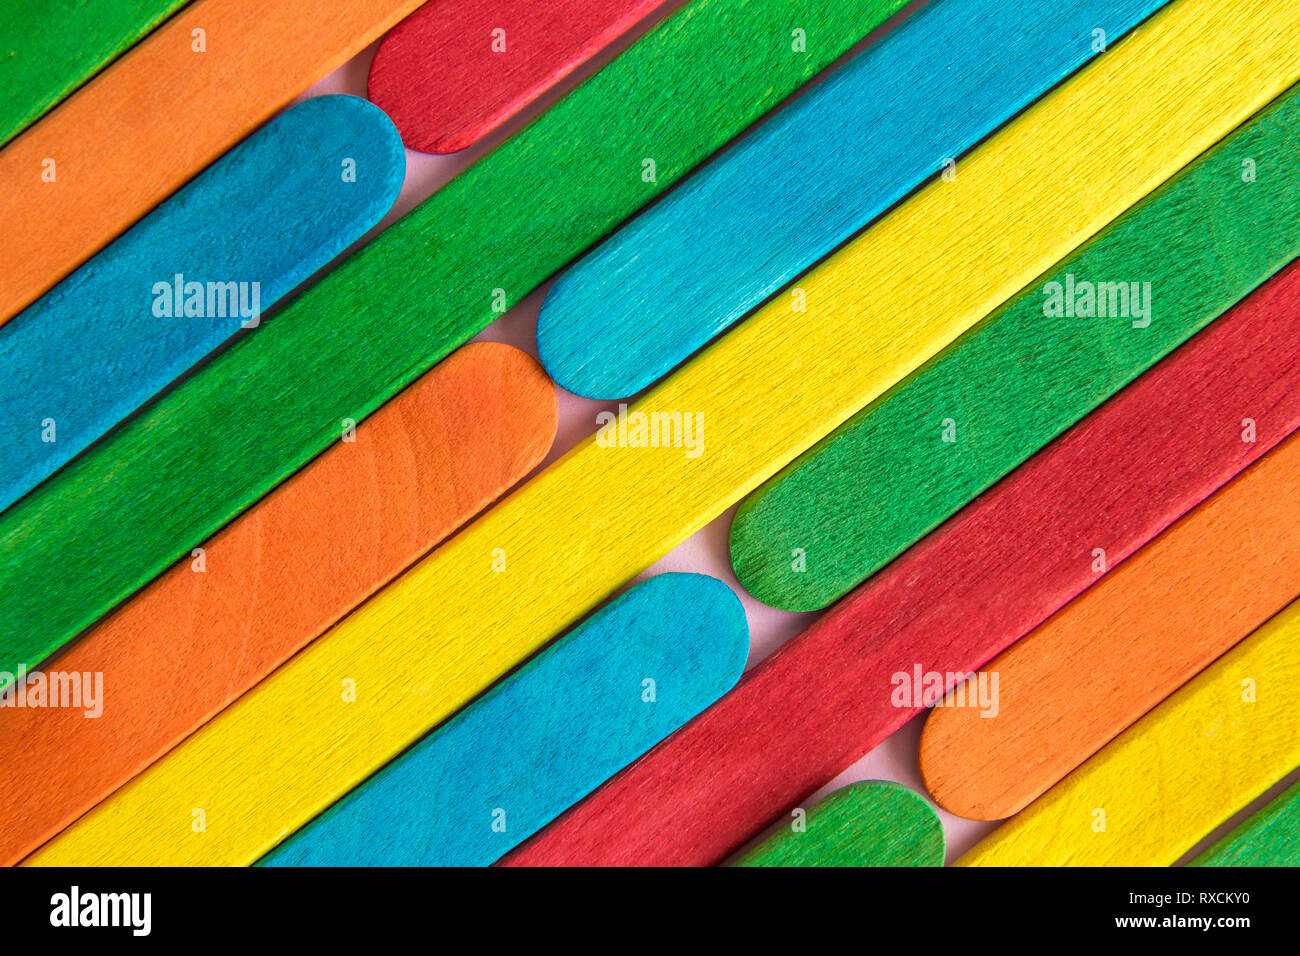 Colorful popsicle sticks background abstract minimal creative